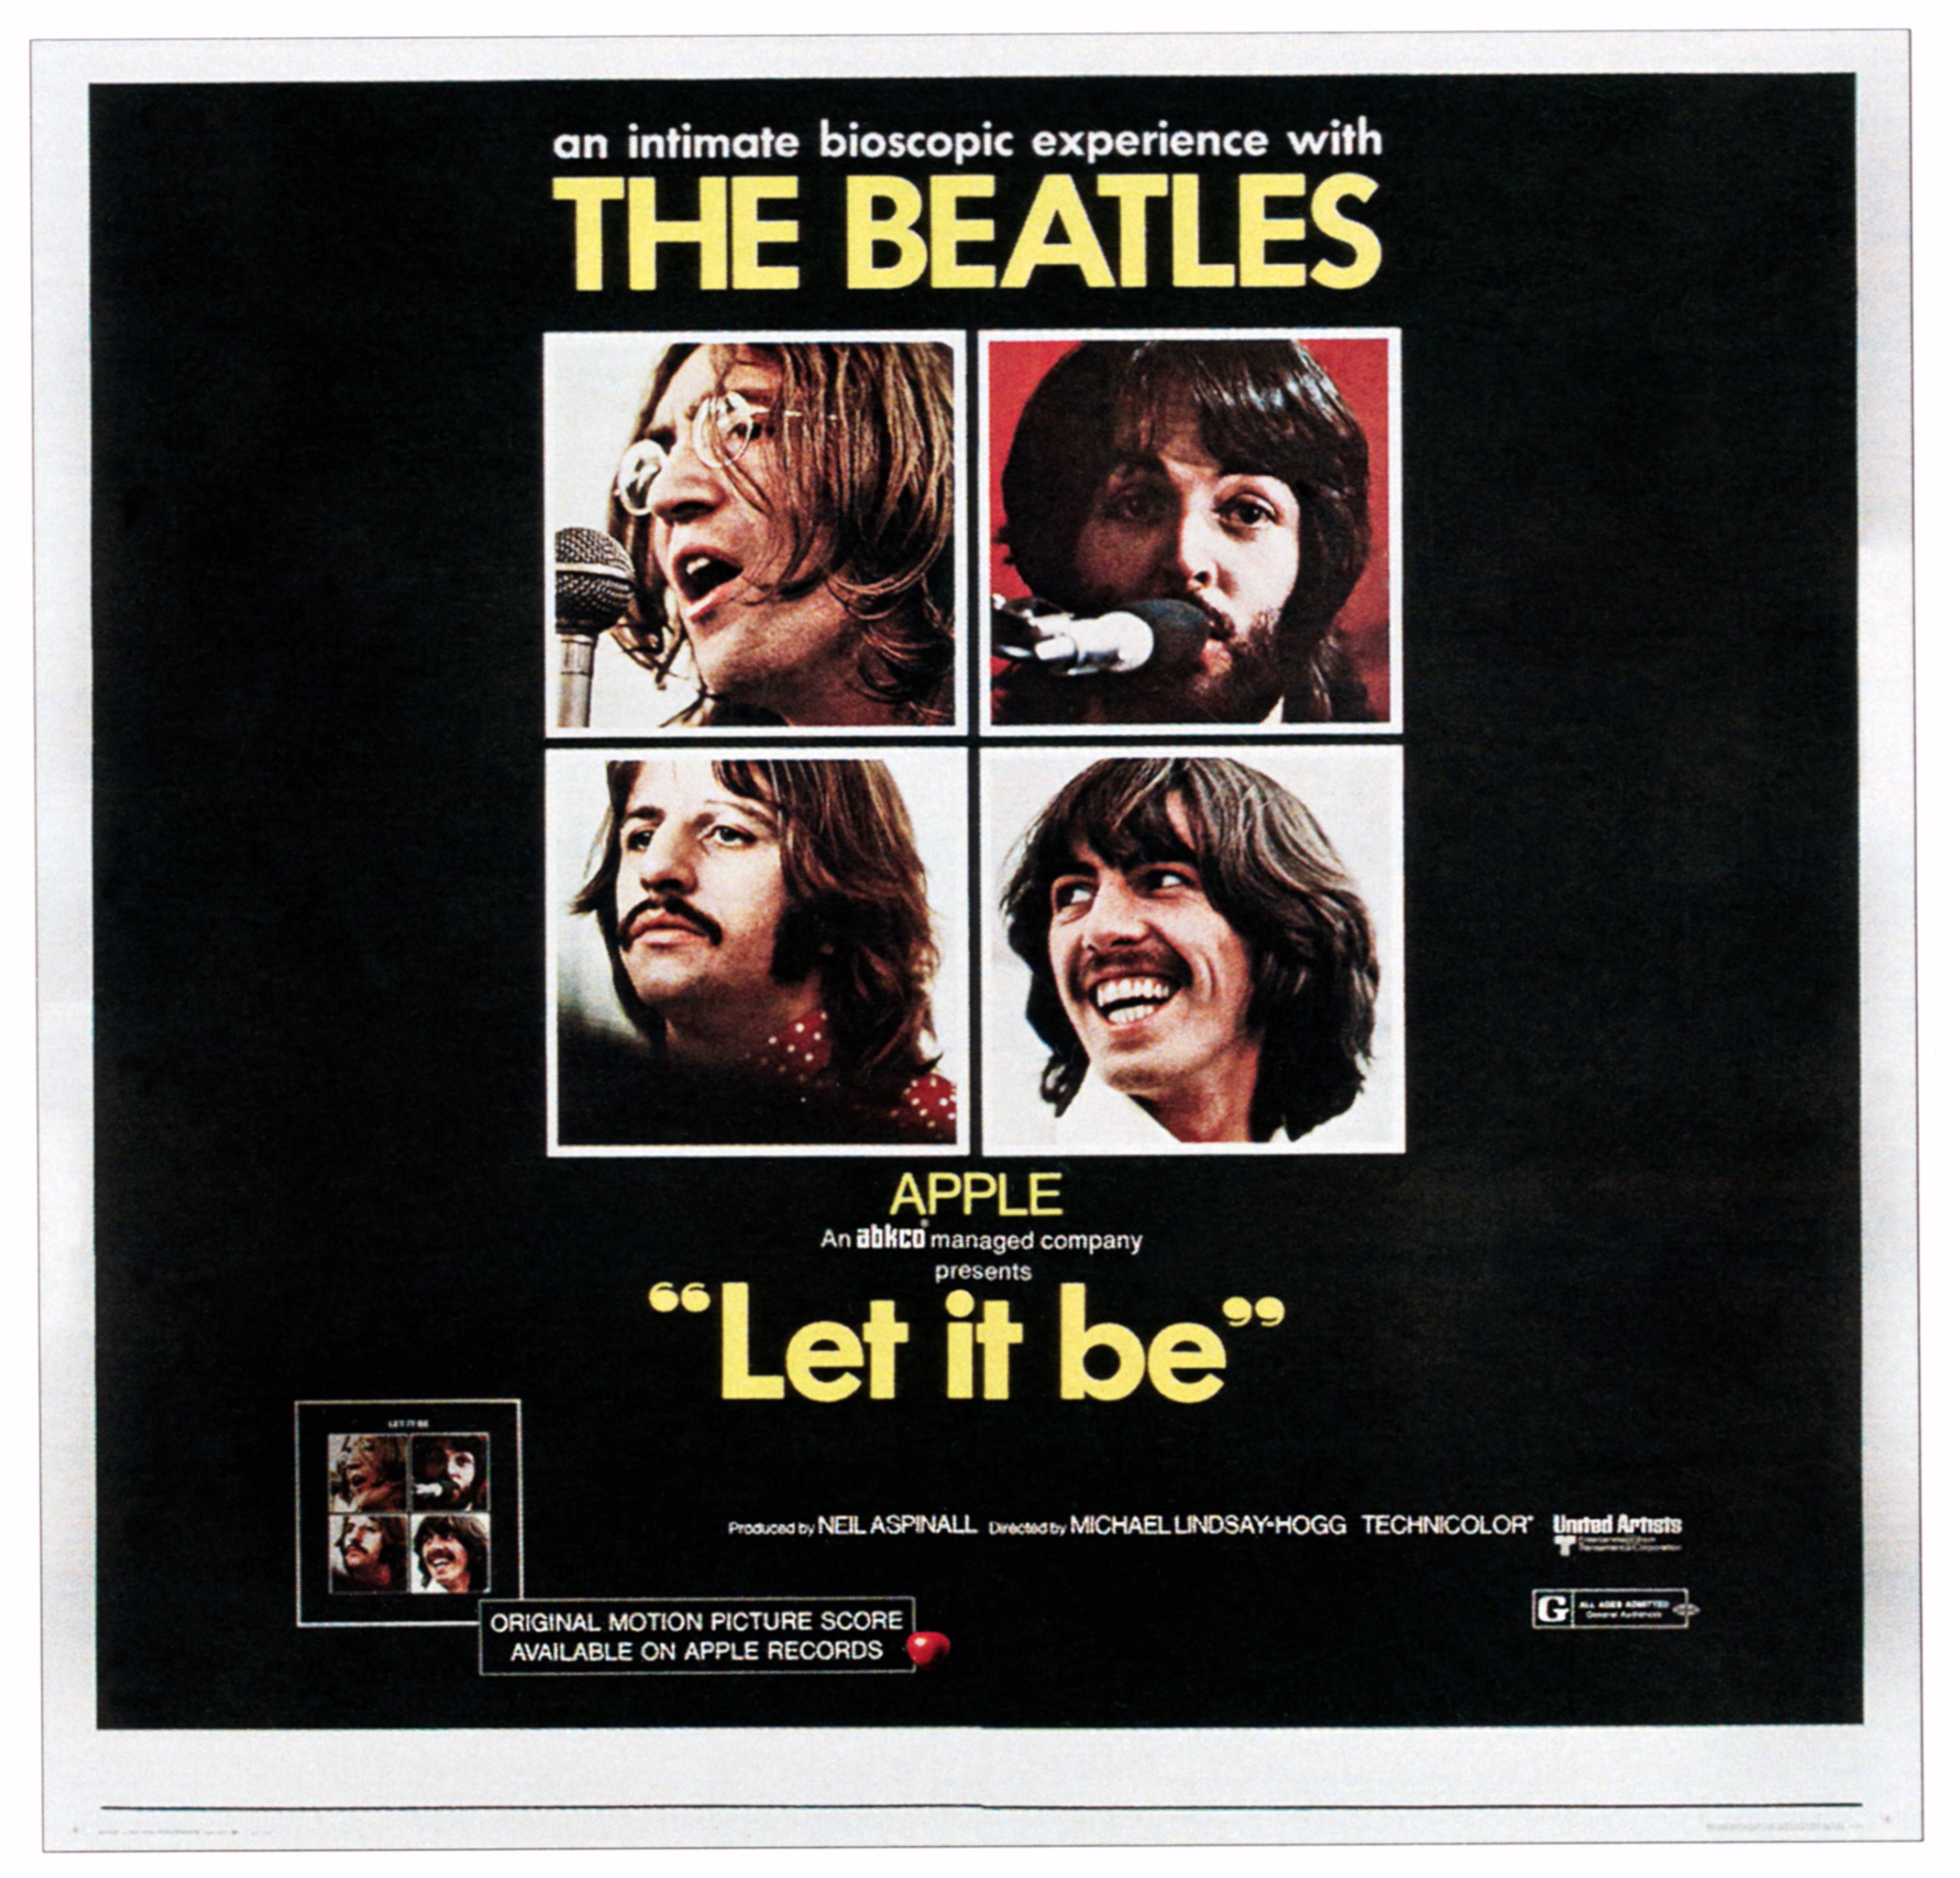 The Beatles' John Lennon, Paul McCartney, George Harrison, and Ringo Starr on a poster for the film 'Let It Be' with a black background
